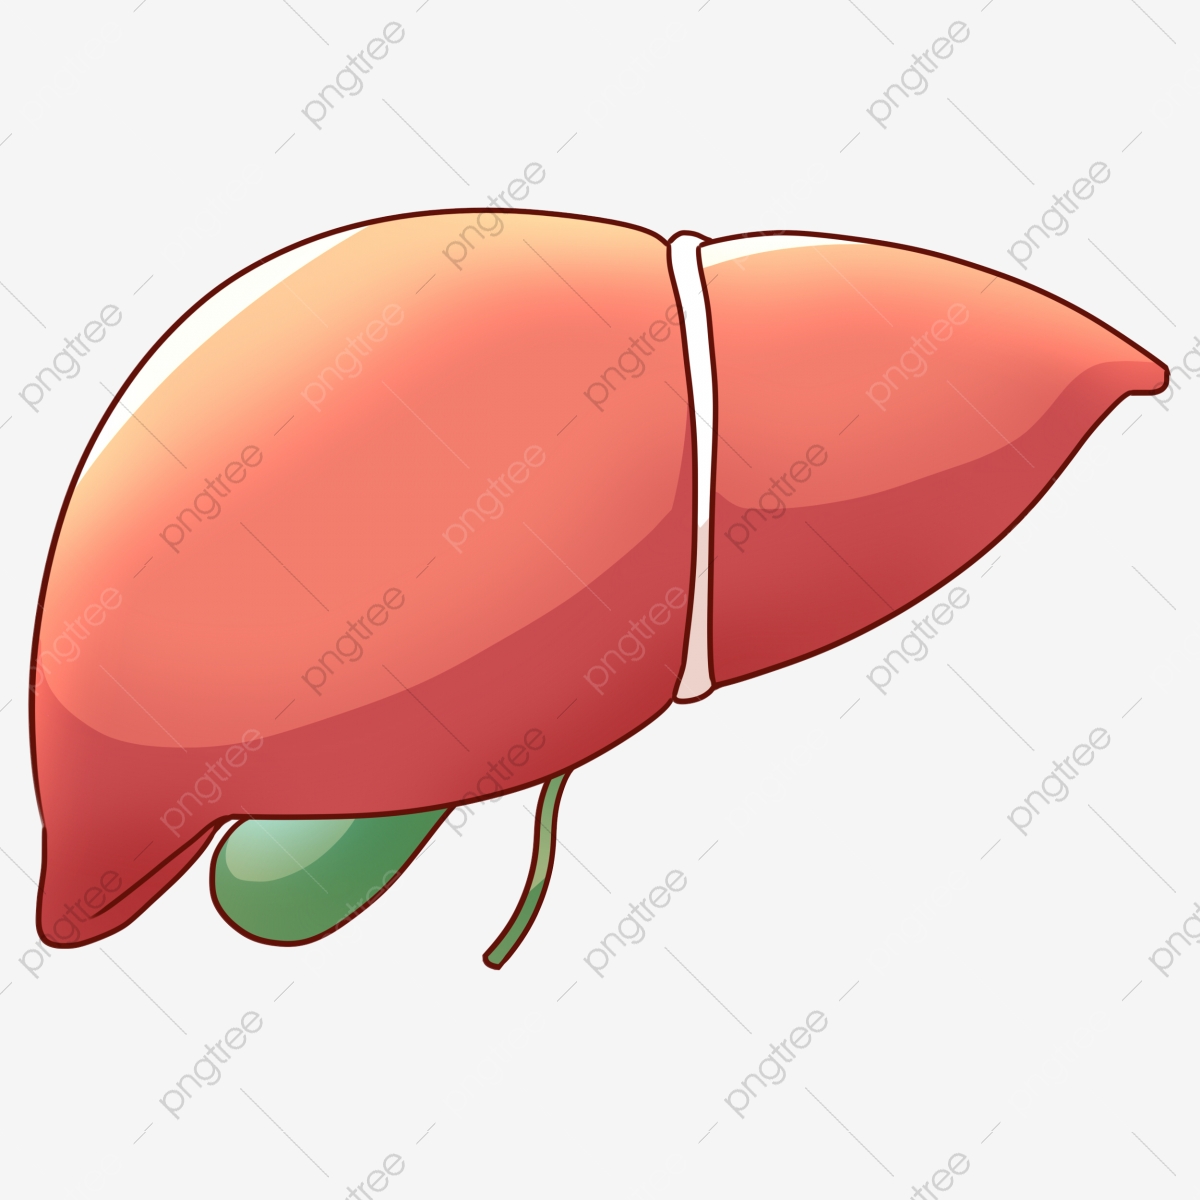 Liver clipart red, Liver red Transparent FREE for download on